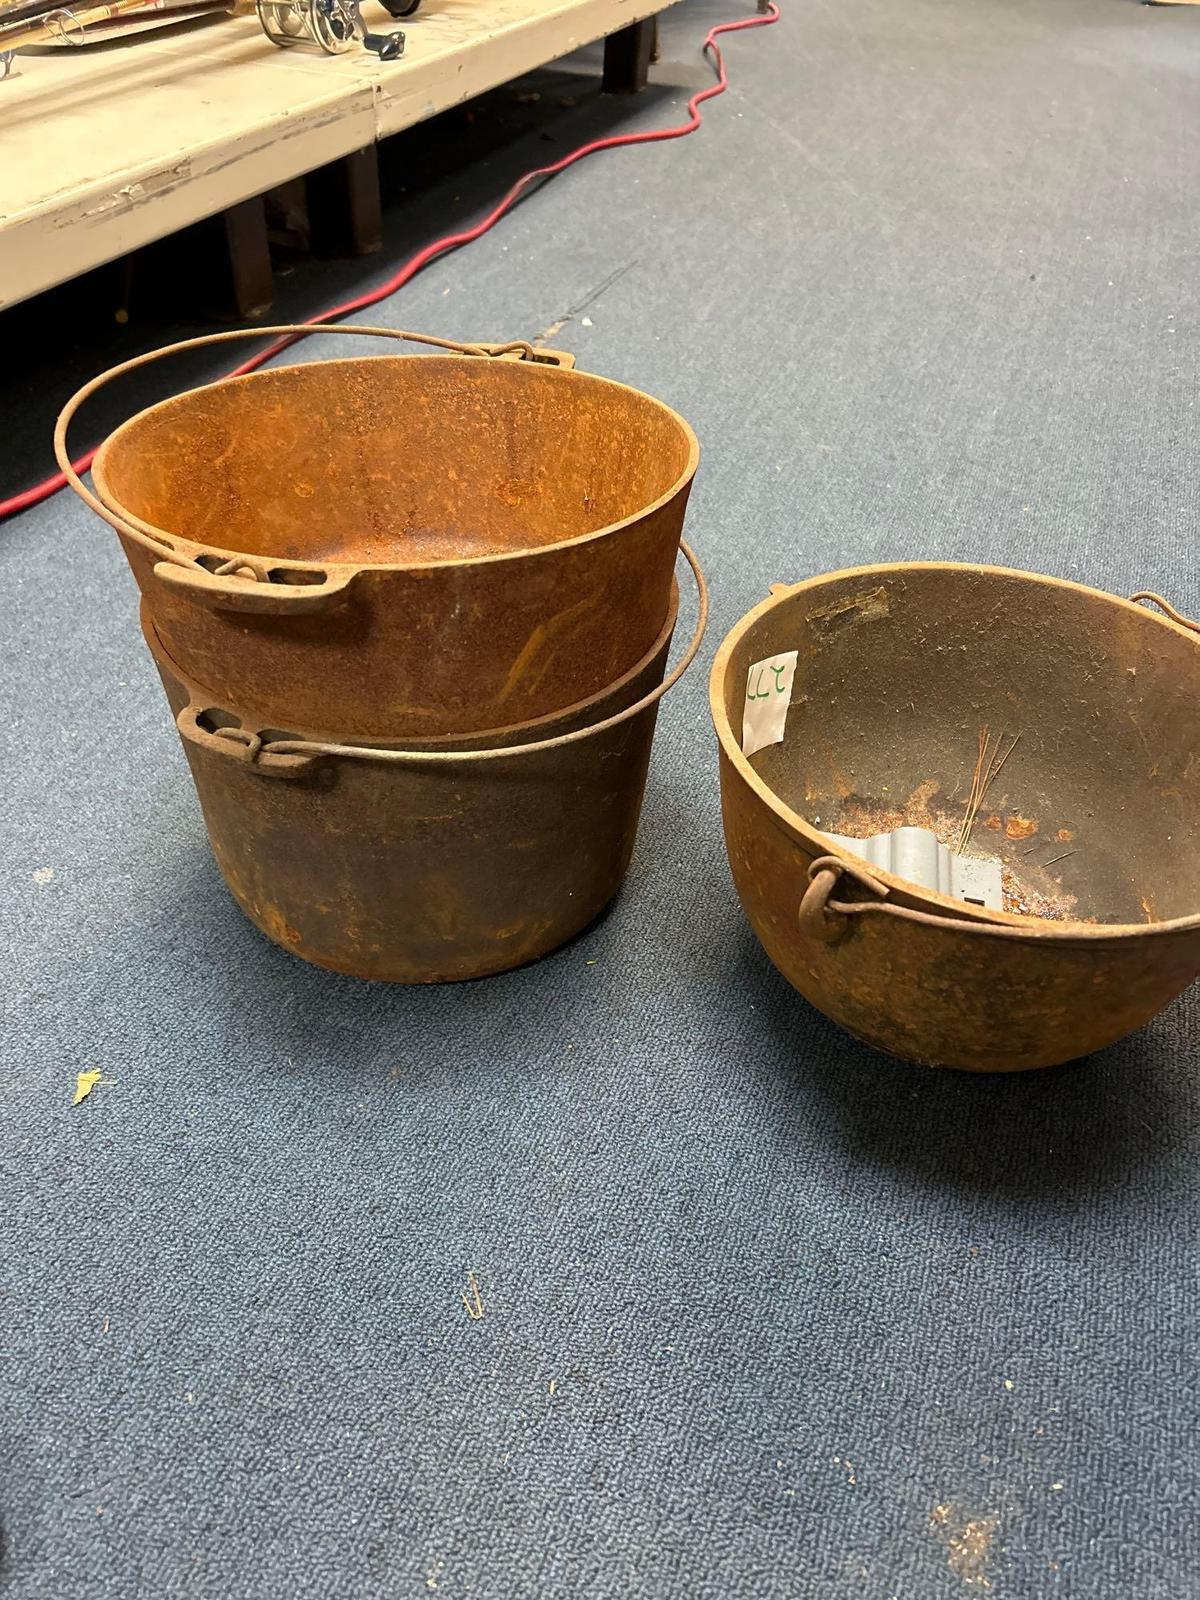 3 cast iron pots approximately 8 to 9 inches tall